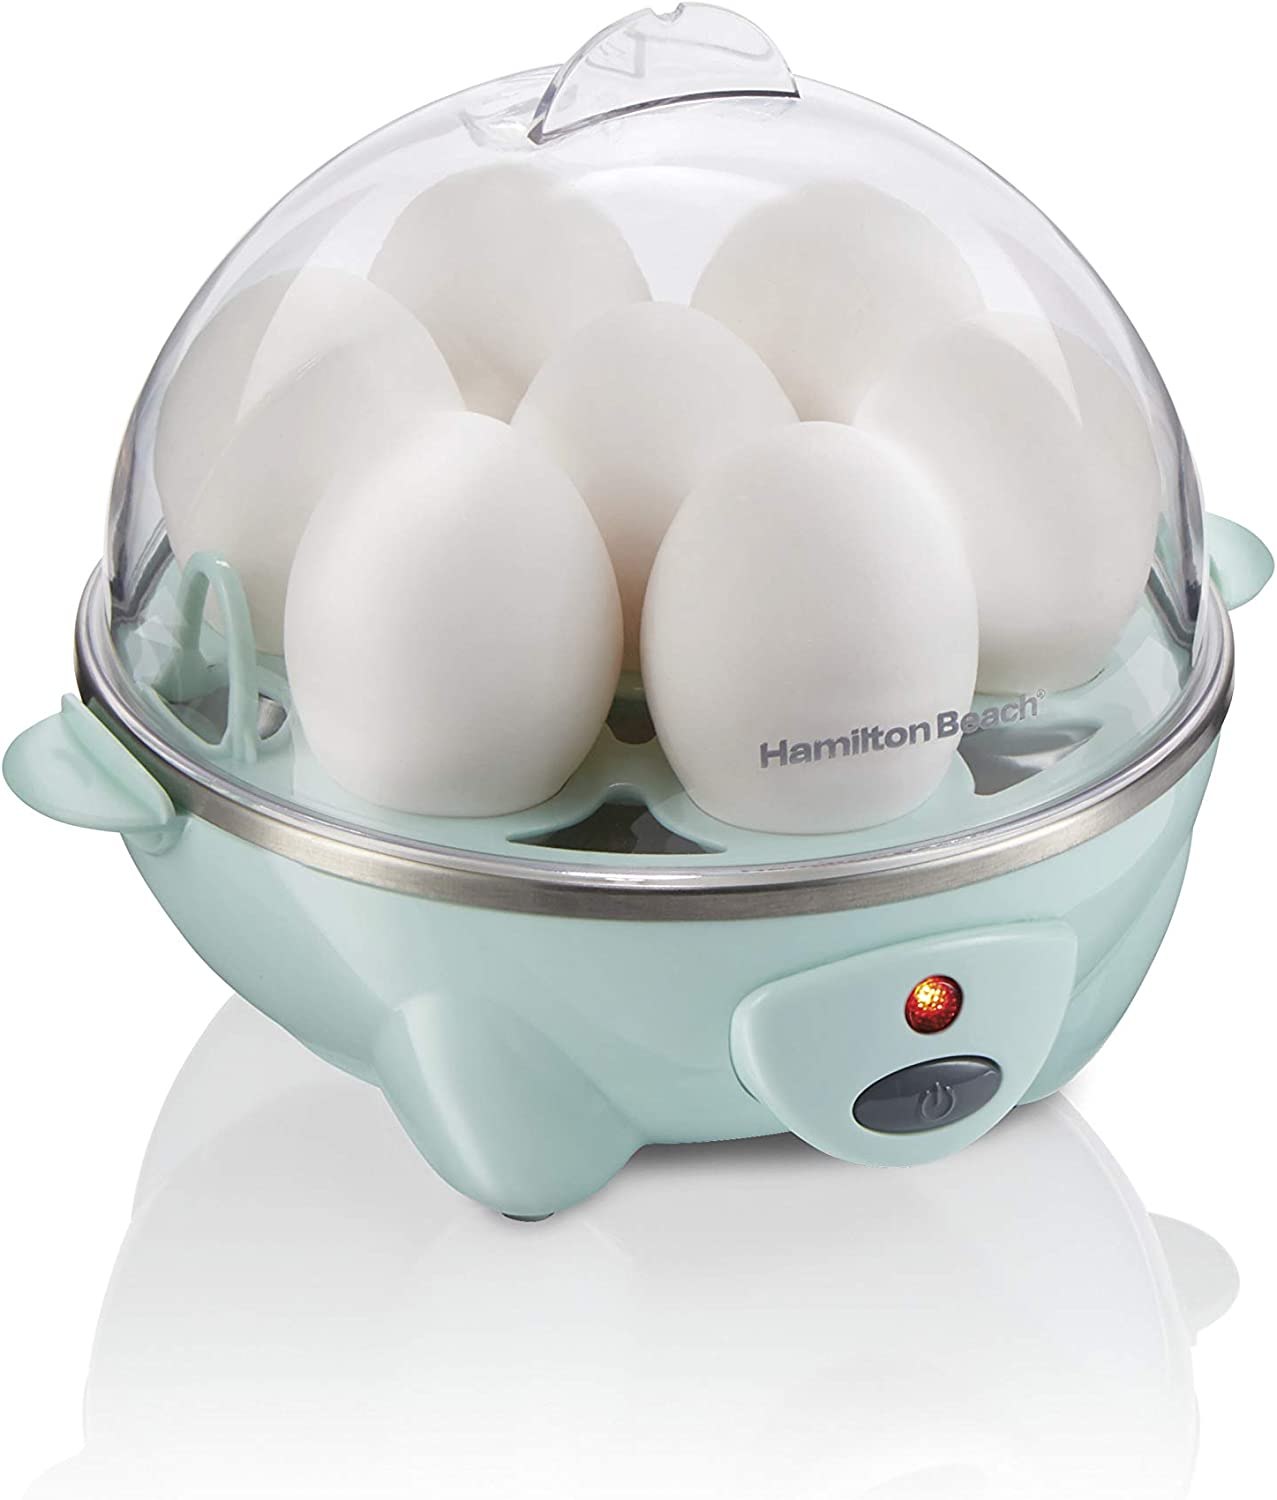 Does the Copper Chef Perfect Egg Maker really make perfect eggs?